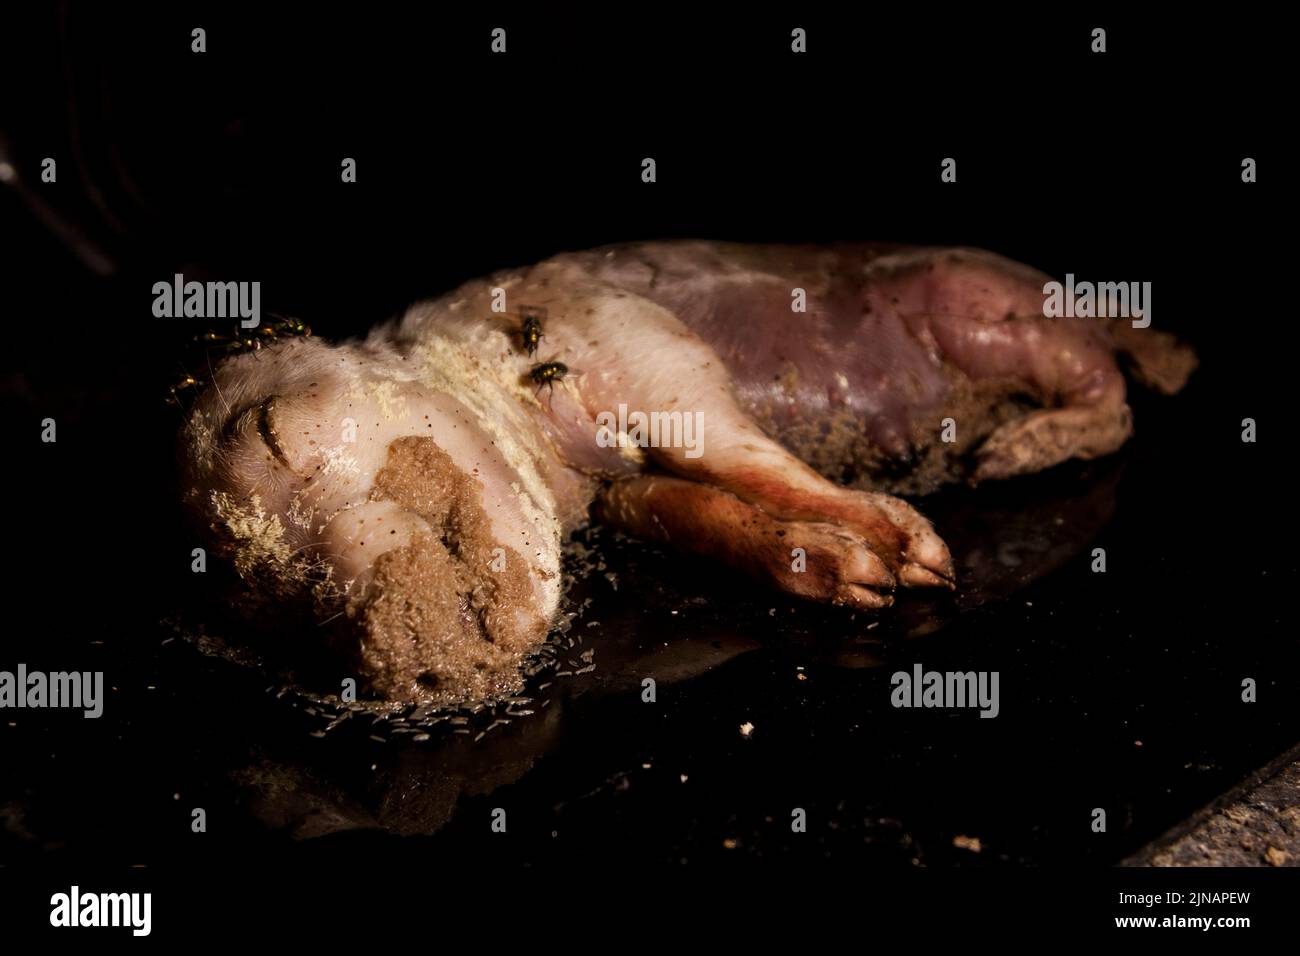 Decomposition stage 1 fresh pig corpse with hatched maggots Stock Photo